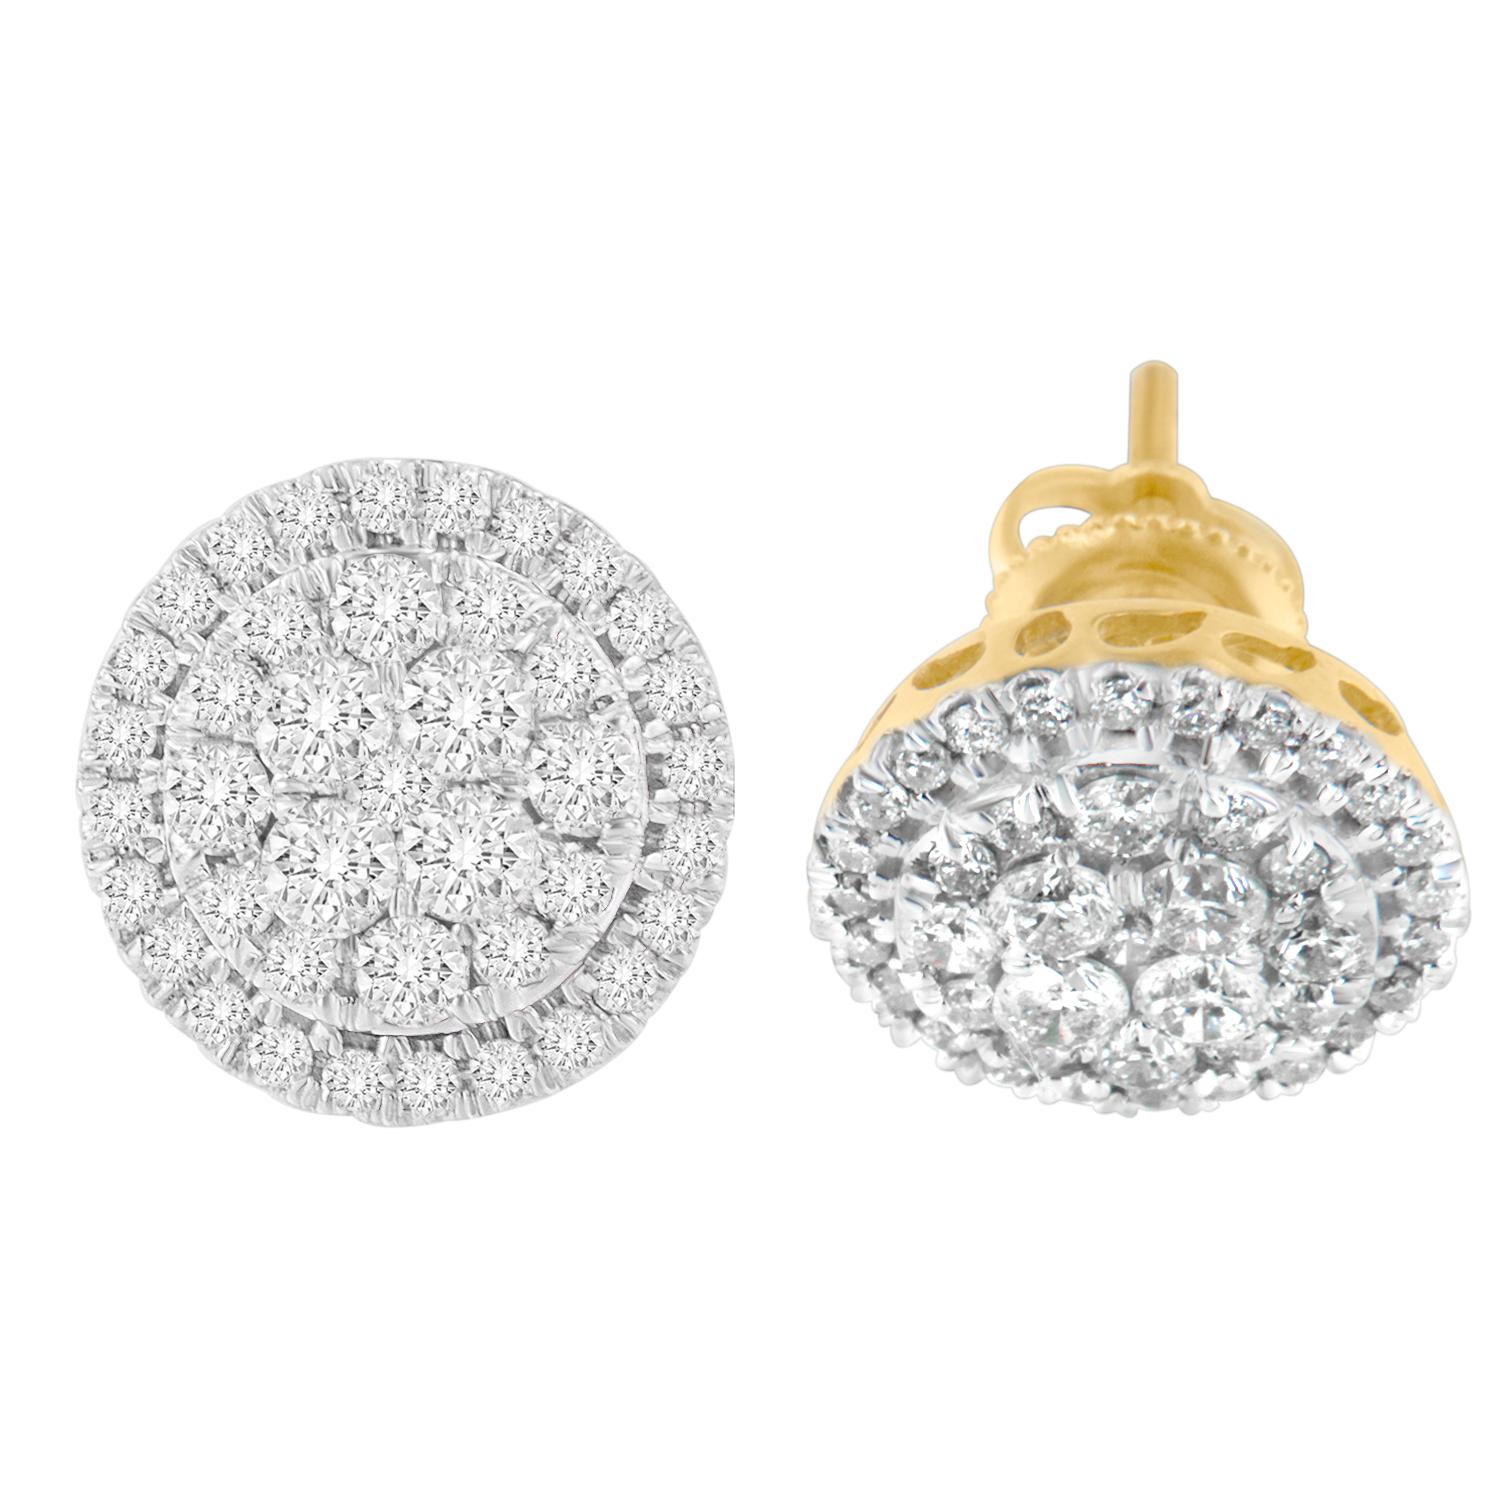 Treat her look in a way that it says I will love you forever. These elegant diamond stud earrings make a stunning selection to adore her beauty. Created with ten karats yellow gold, the earrings are polished to shine high with grace. Fashioned in